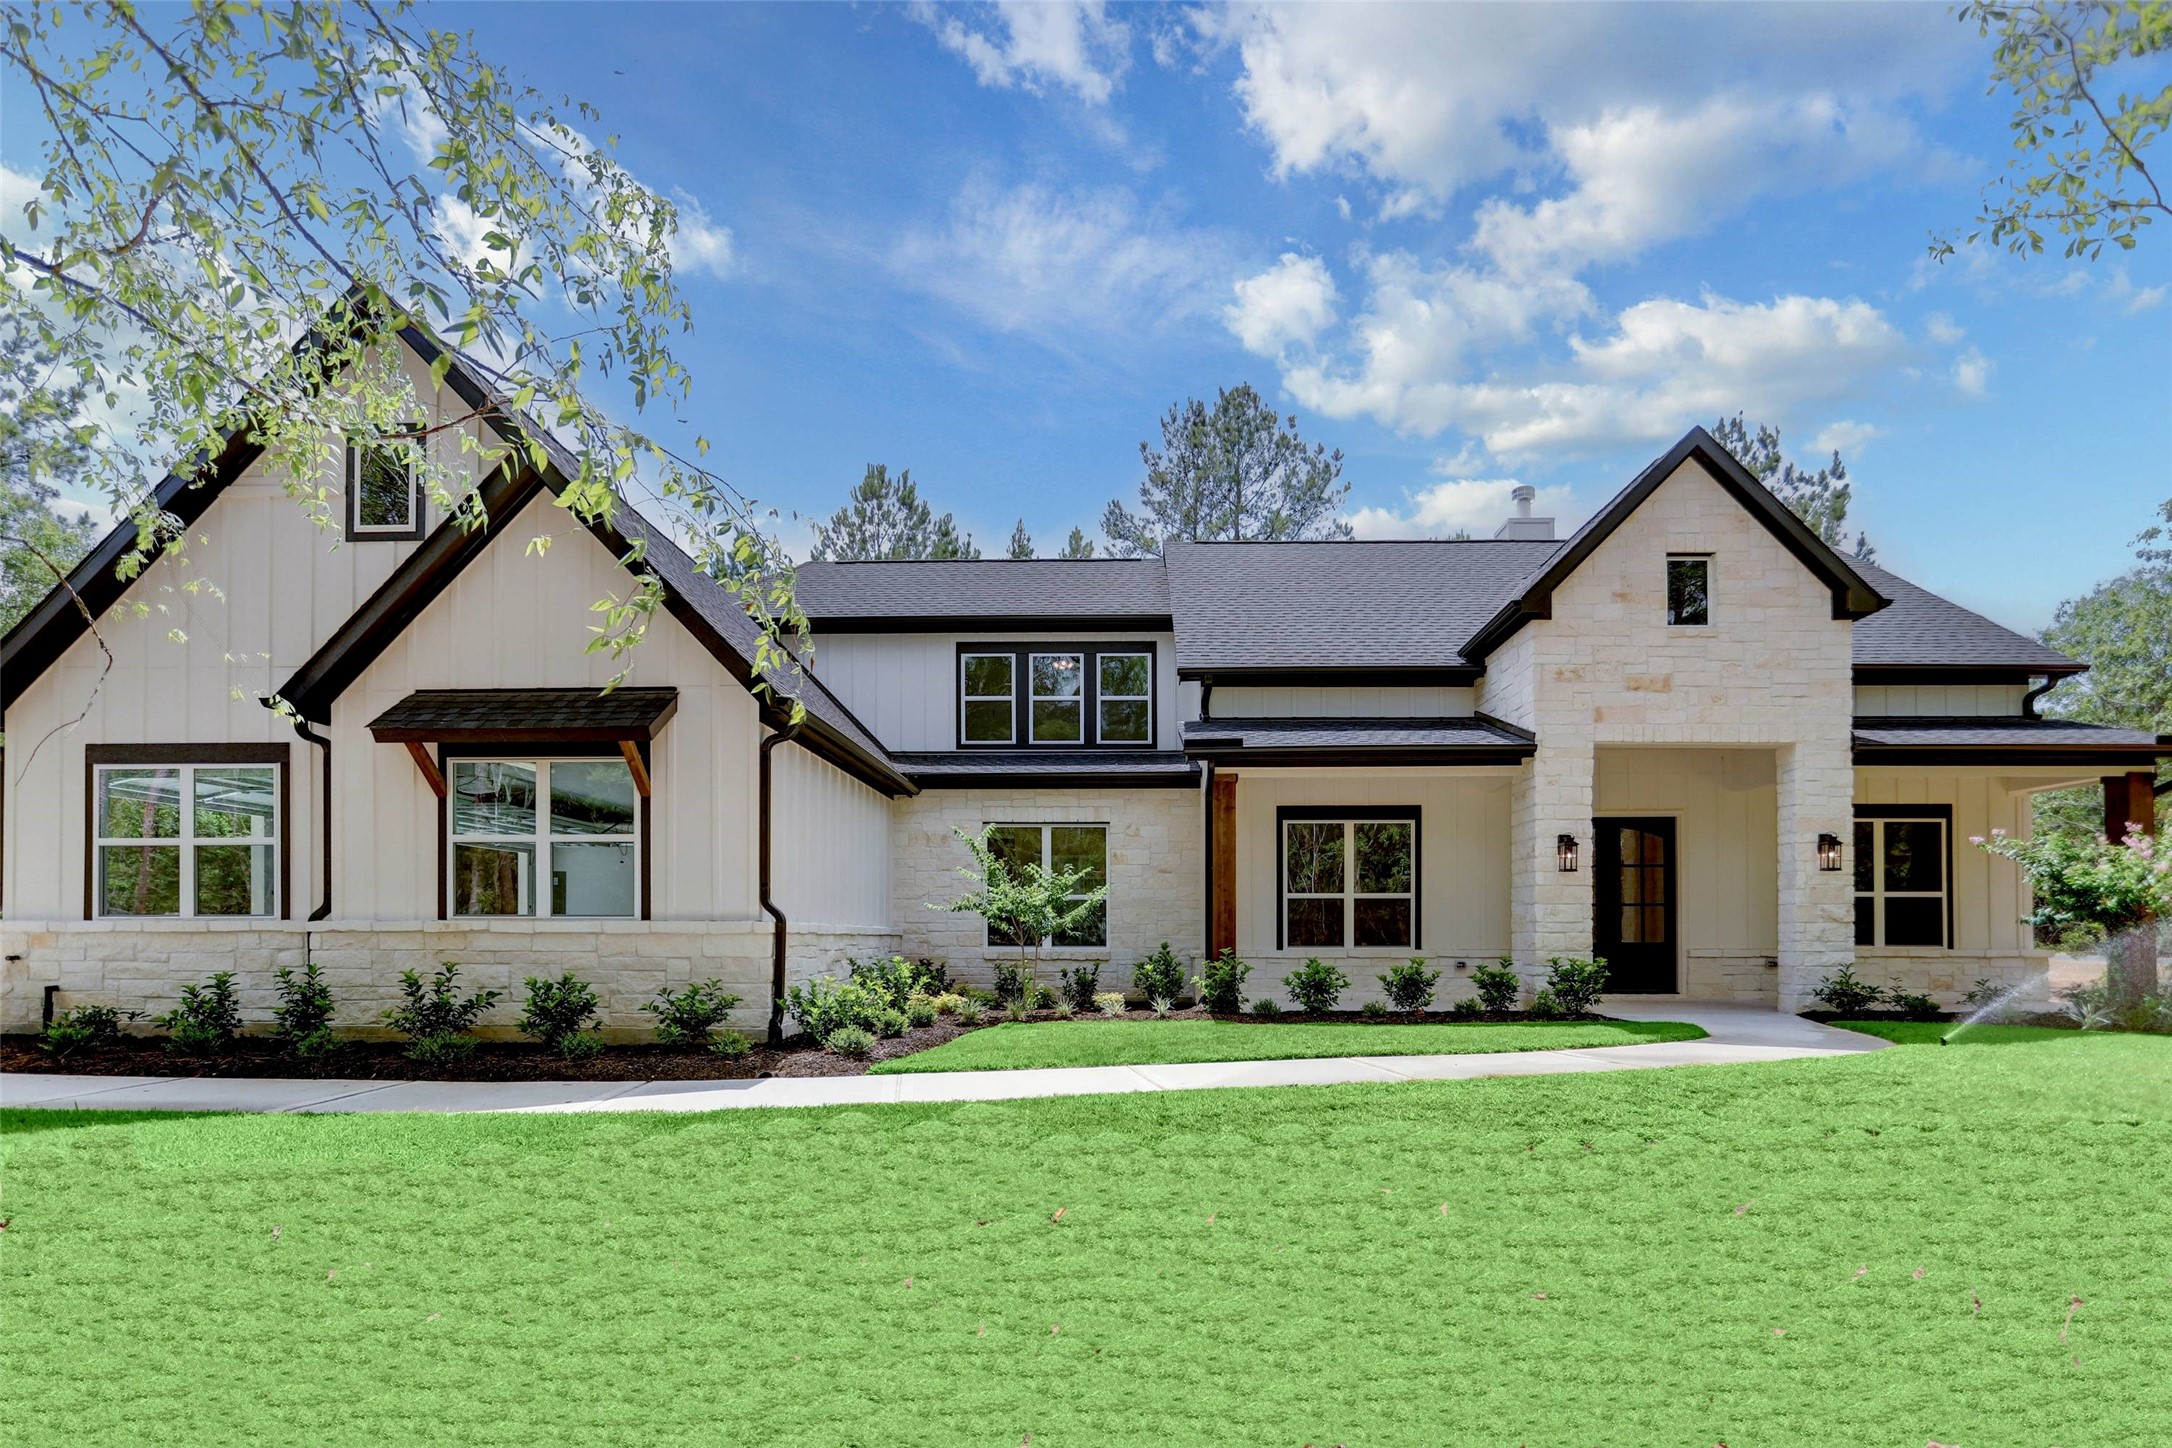 THE PICTURE SHOWN IS NOT THE ACTUAL HOME. TRINITY SIGNATURE HOMES IS BUILDING A SIMILAR FLOOR PLAN.